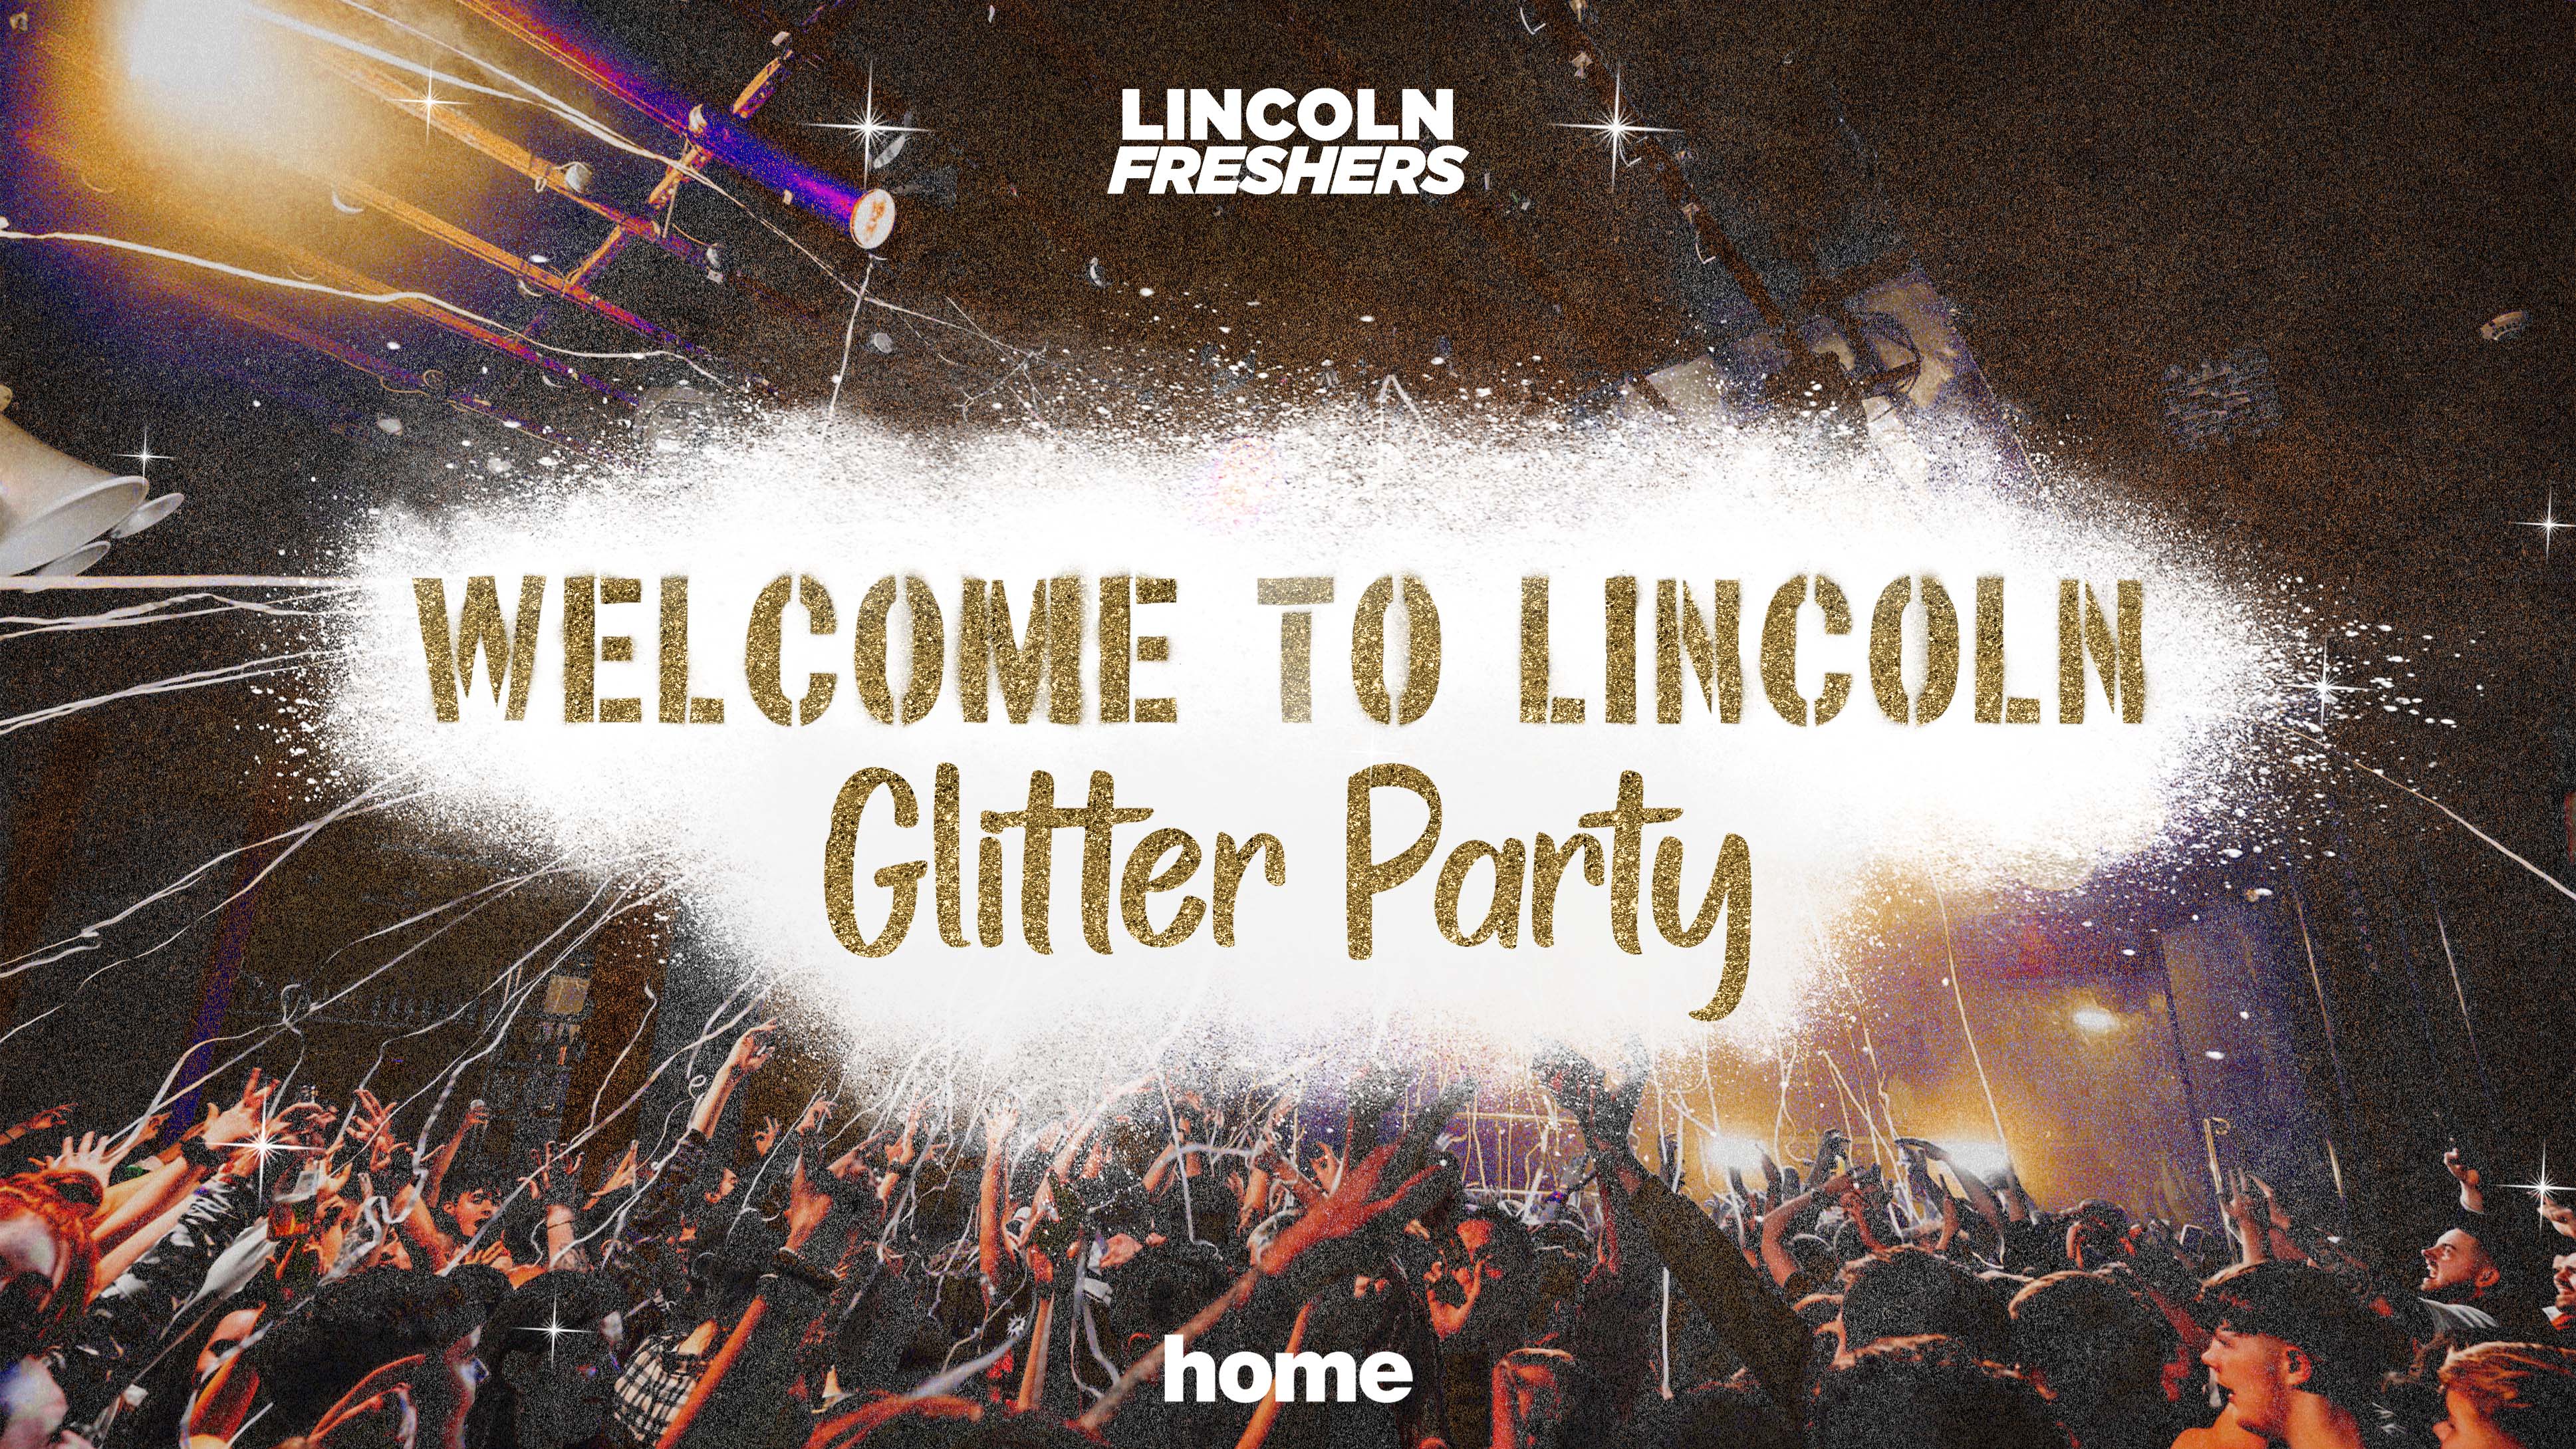 THE WELCOME TO LINCOLN GLITTER RAVE // HOME NIGHTCLUB